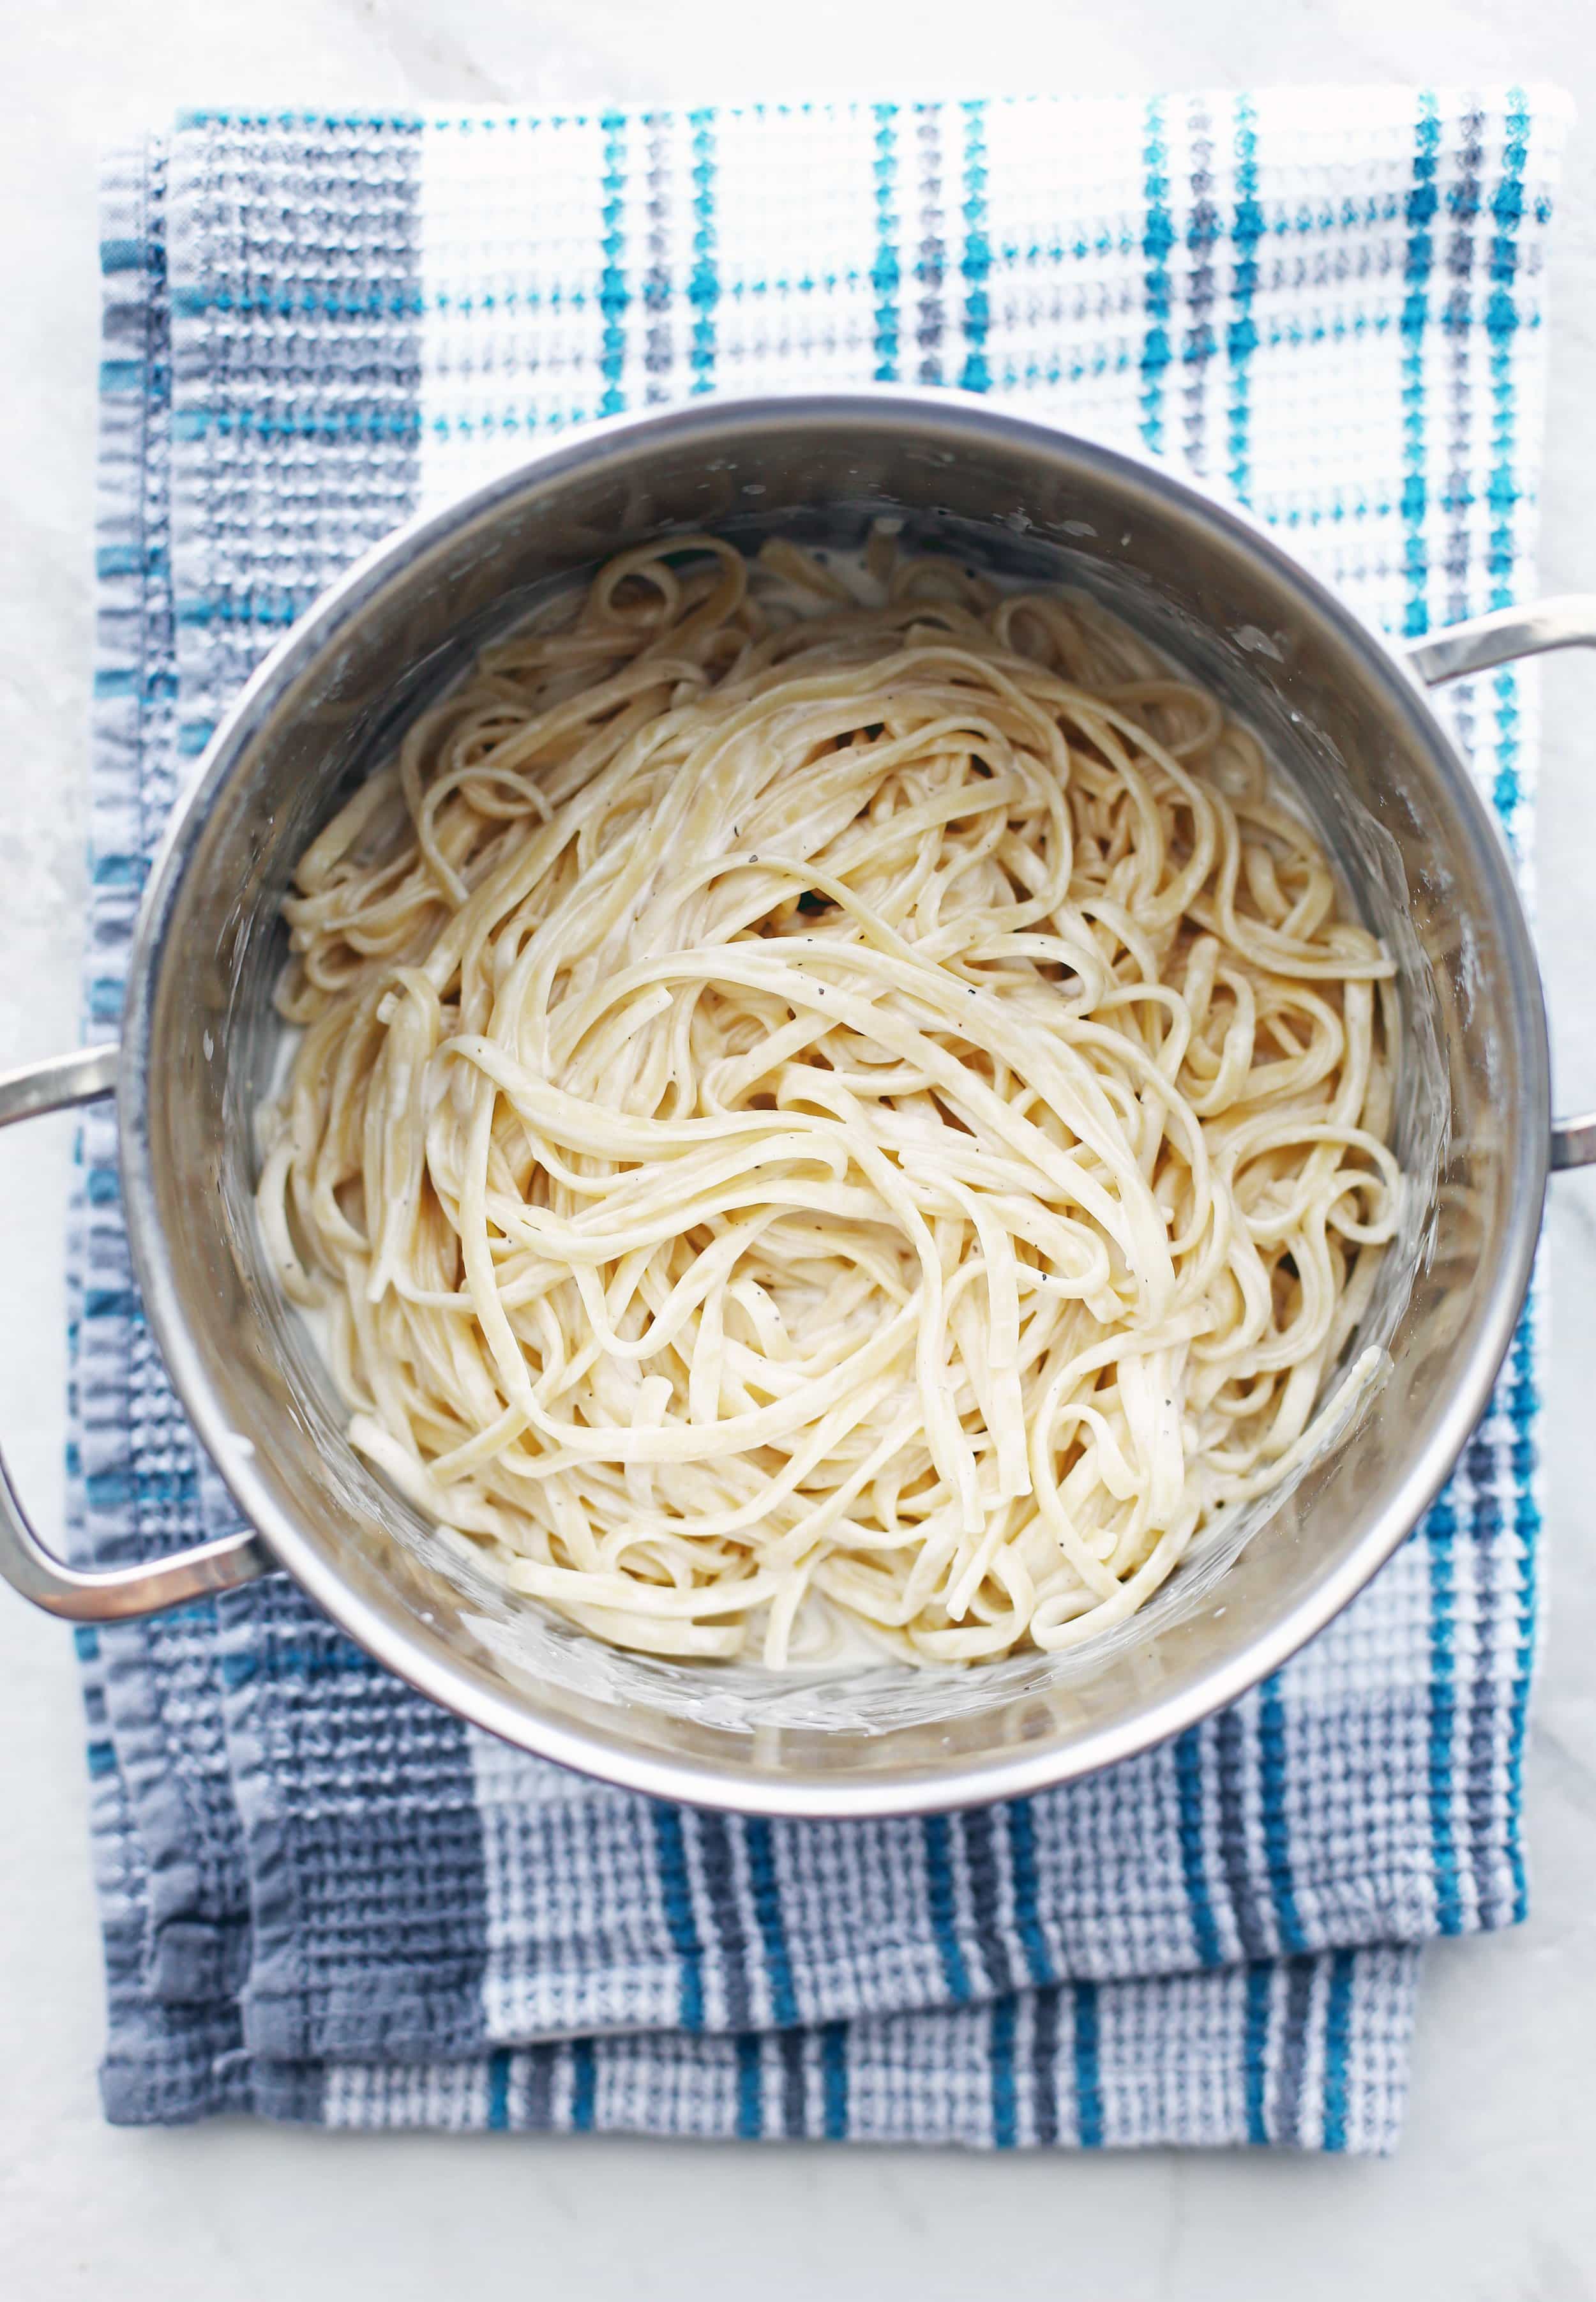 Al dente linguine pasta coated with creamy goat cheese sauce in a large metal pot.